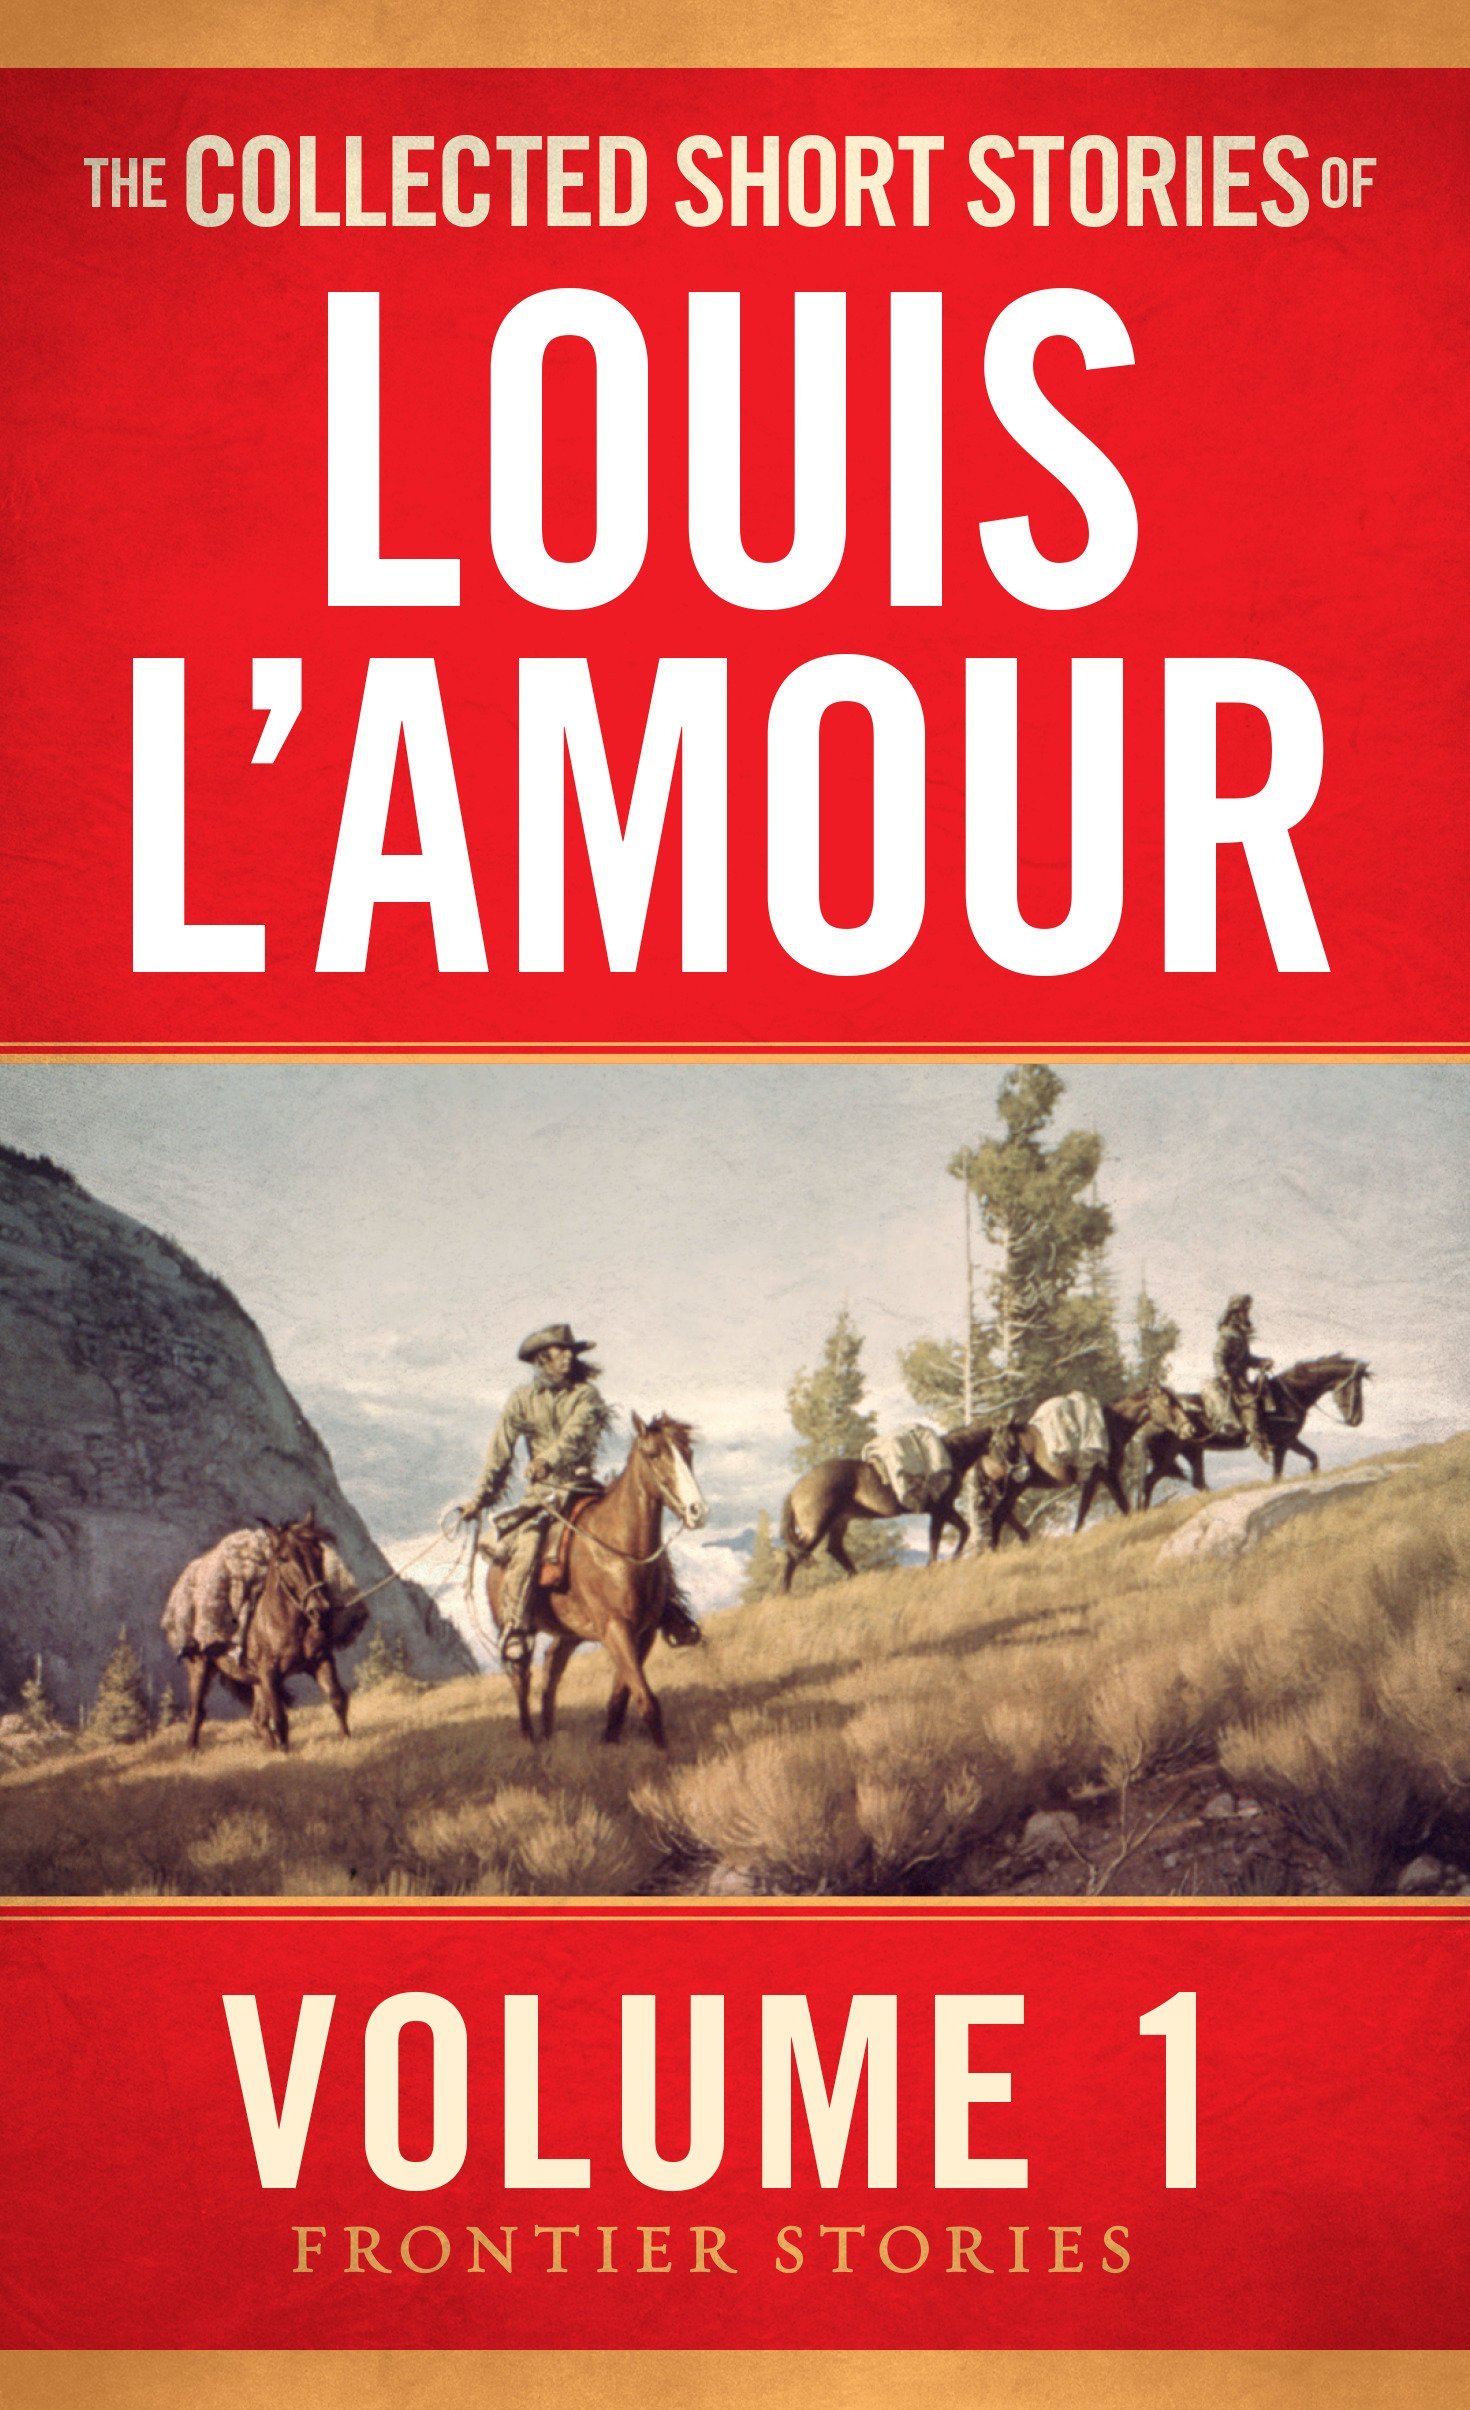 End of the Drive - A collection of short stories by Louis L'Amour